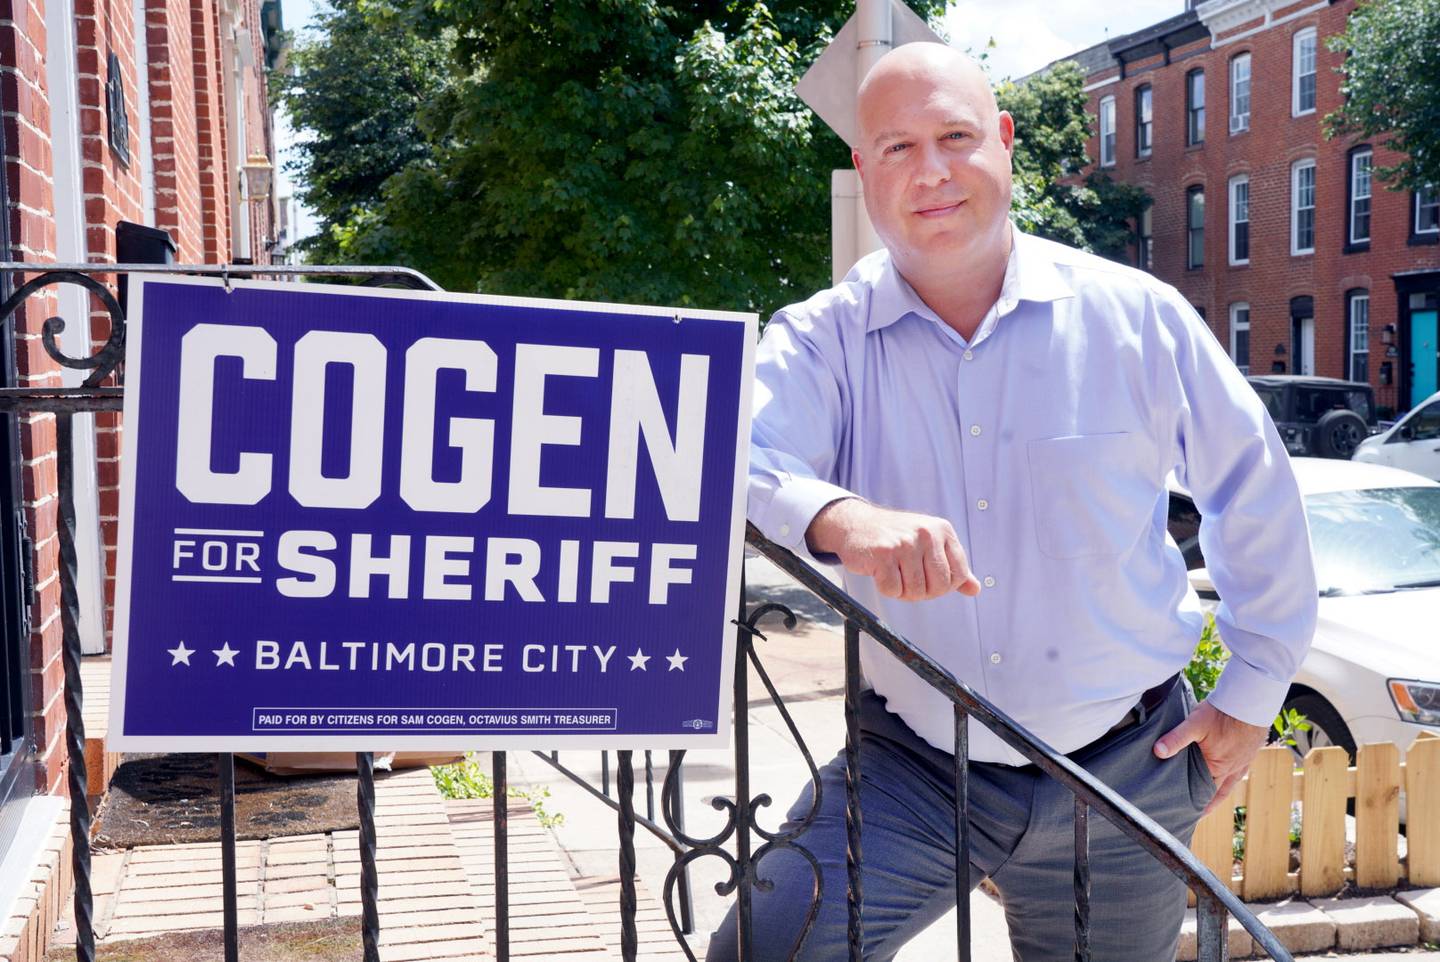 JUNE 10,2022—Sam Cogen a longstanding public servant who worked in the Baltimore City Sheriff’s Office between 1996 and 2021, is running for Sheriff. Sam started his distinguished, 25-year career as an intern and worked his way up through the ranks to become a top commander.